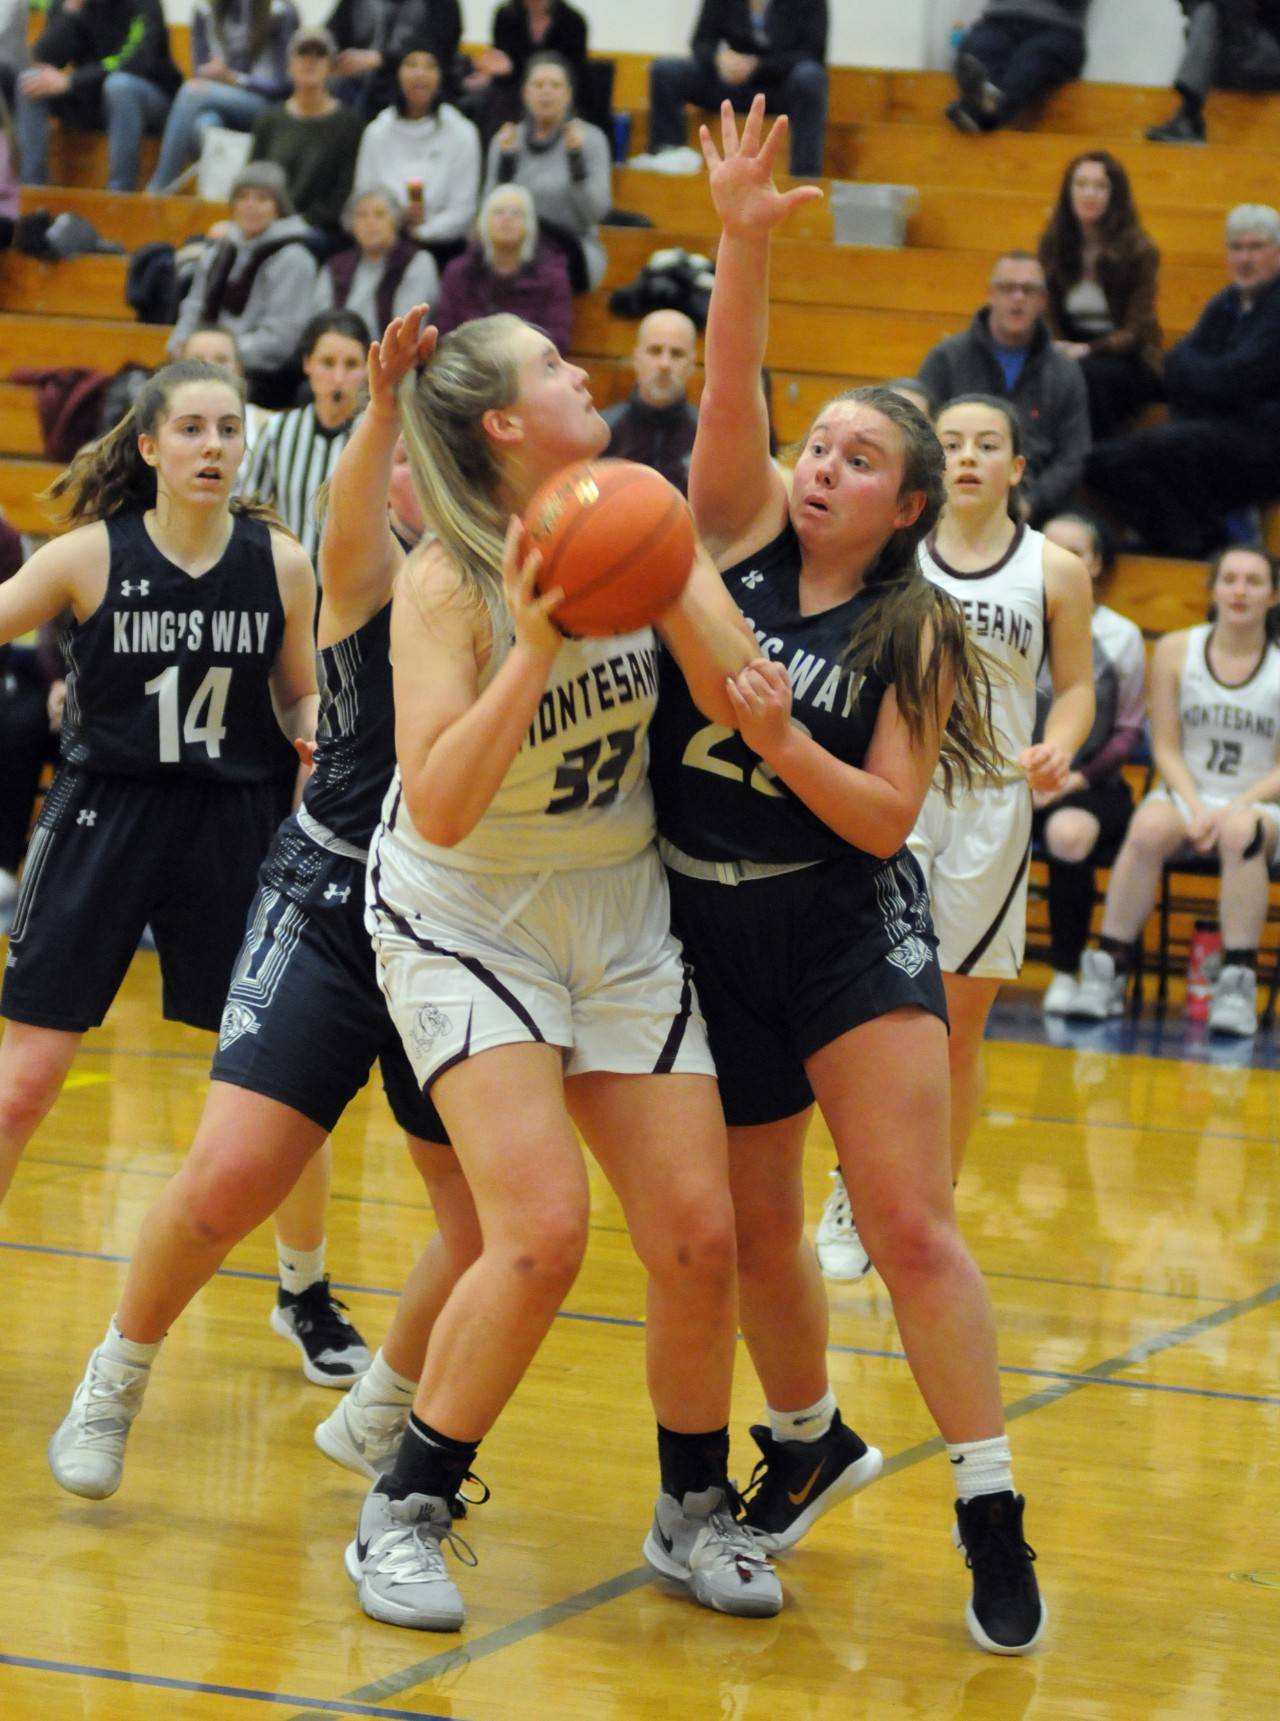 Montesano’s Zoe Hutchings (33) looks for a shot while being defended by King’s Way Christian’s Sara Thuduim during Wednesday’s 1A District 4 Girls Basketball Tournament consolation game at Rochester High School. Montesano won 43-29. (Ryan Sparks | Grays Harbor News Group)